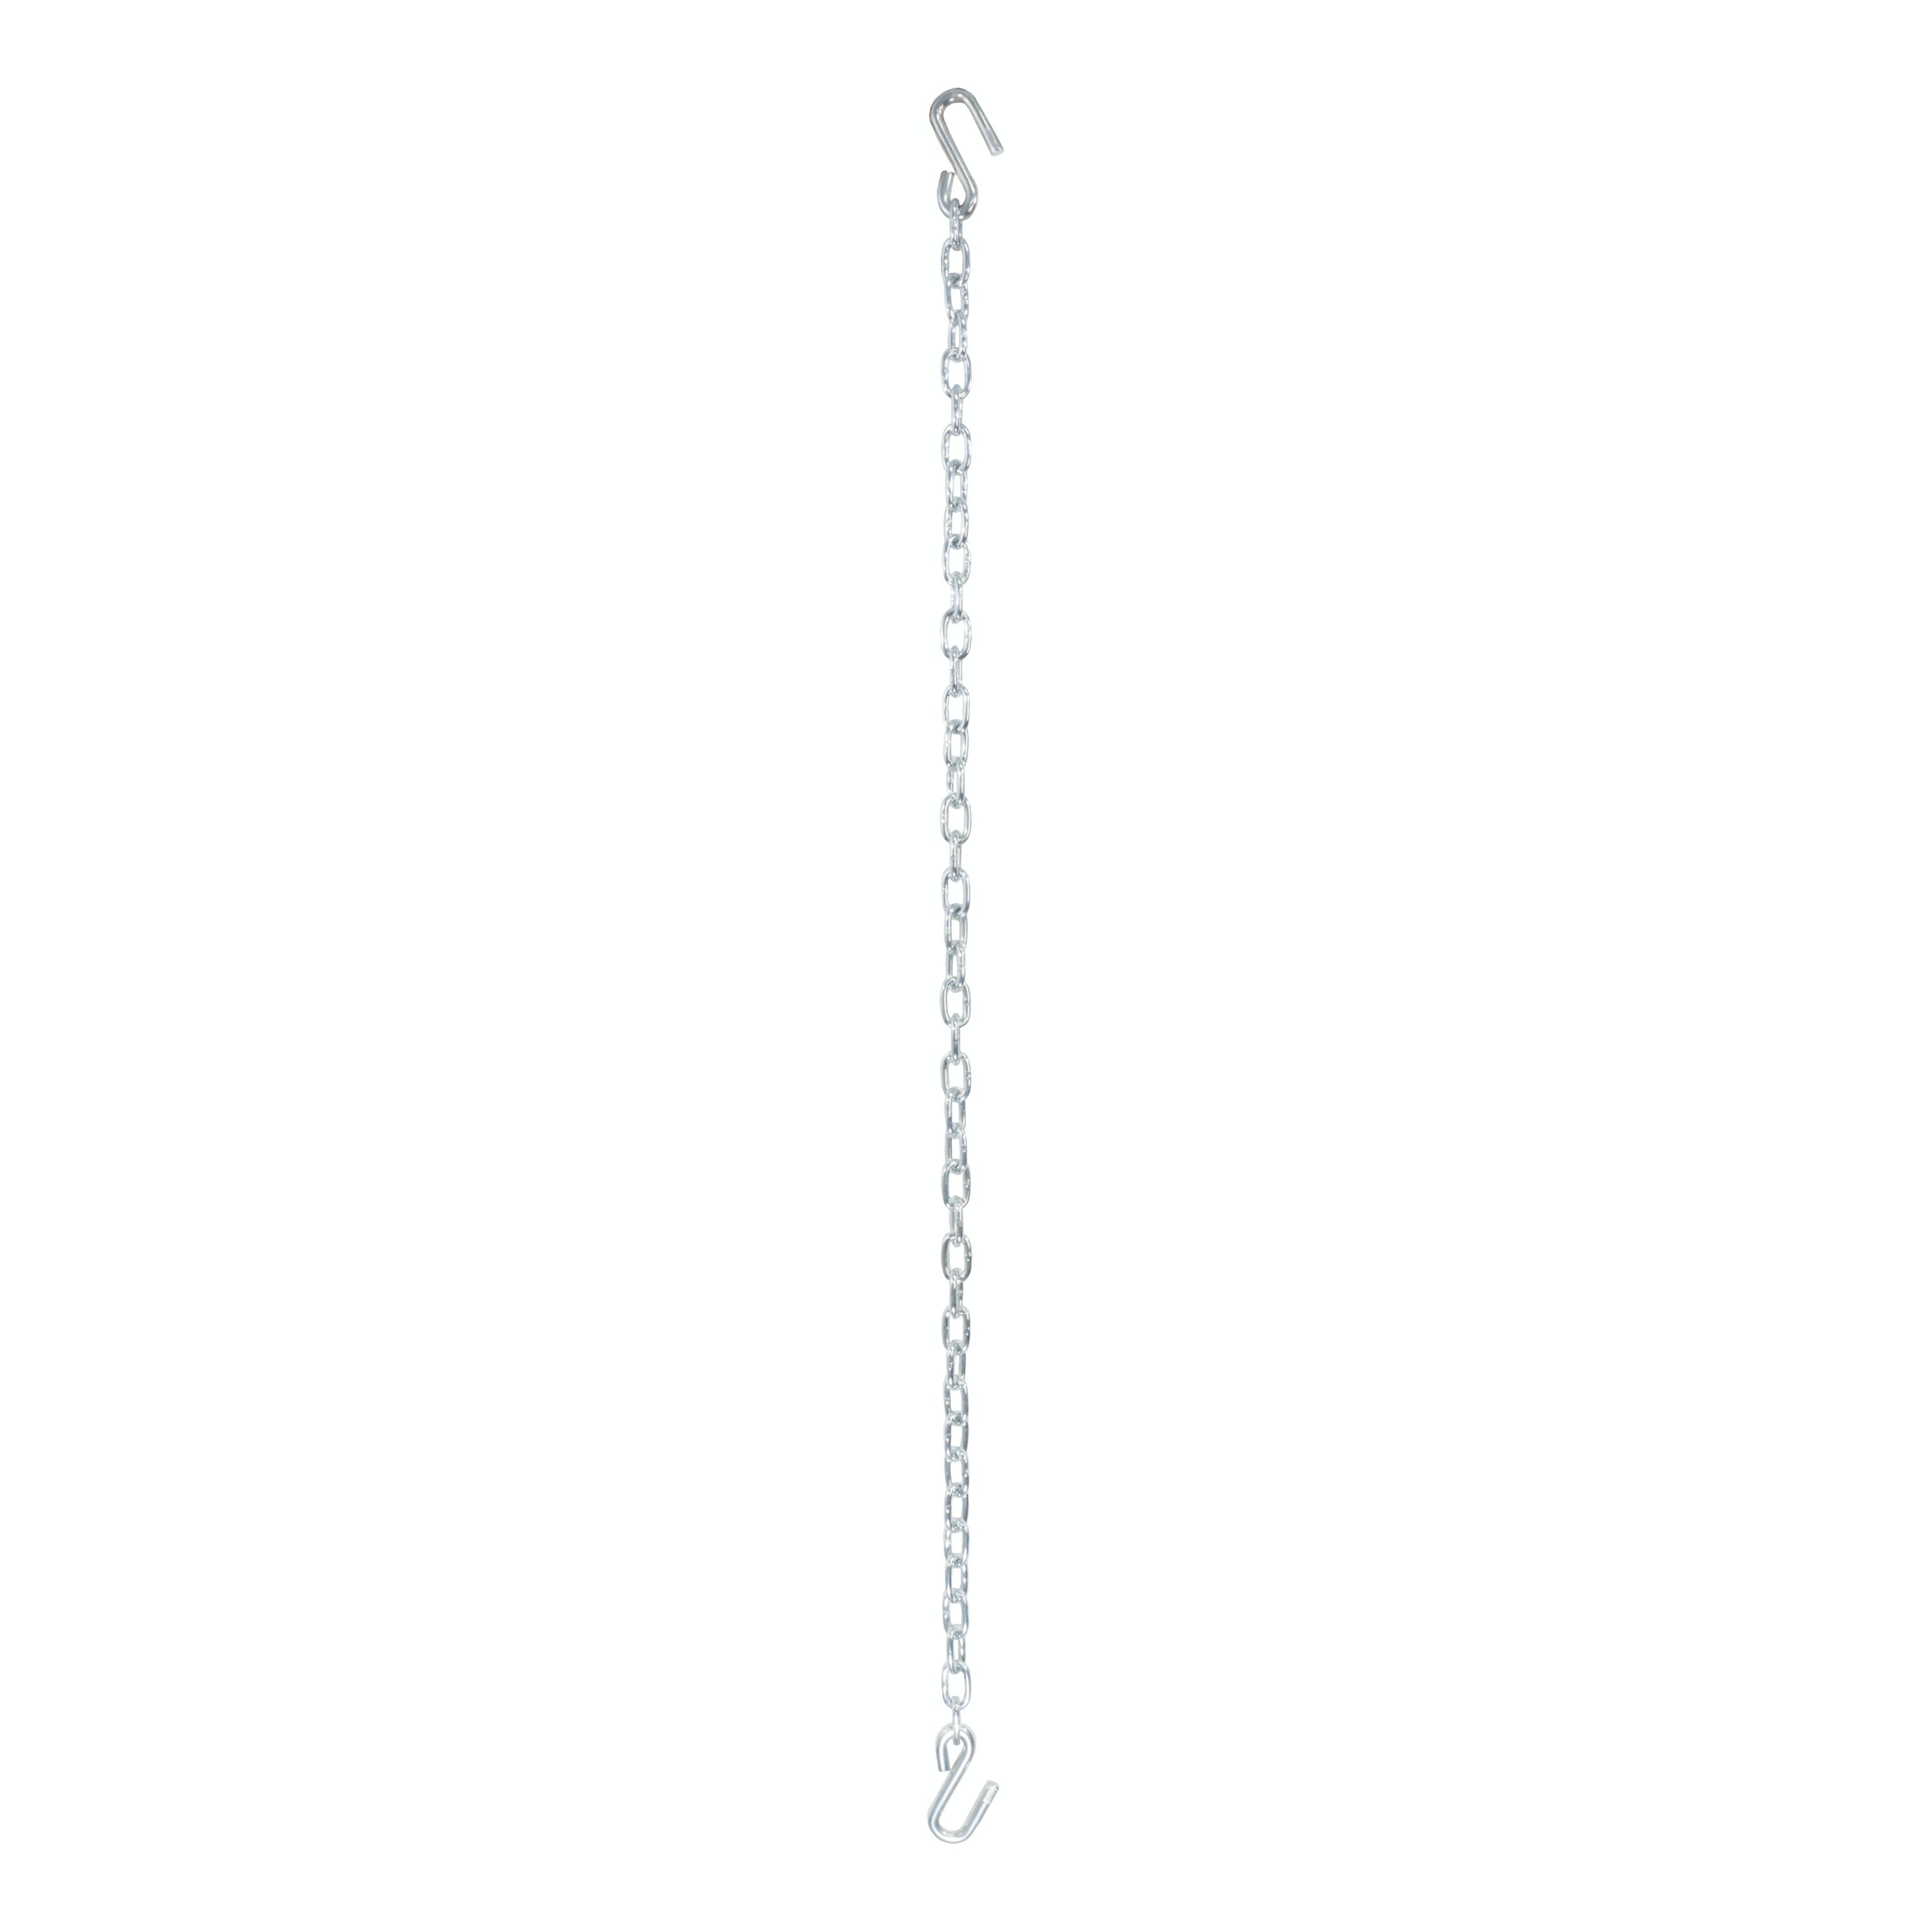 CURT 80011 48 Safety Chain with 2 S-Hooks (2,000 lbs, Clear Zinc, Packaged)